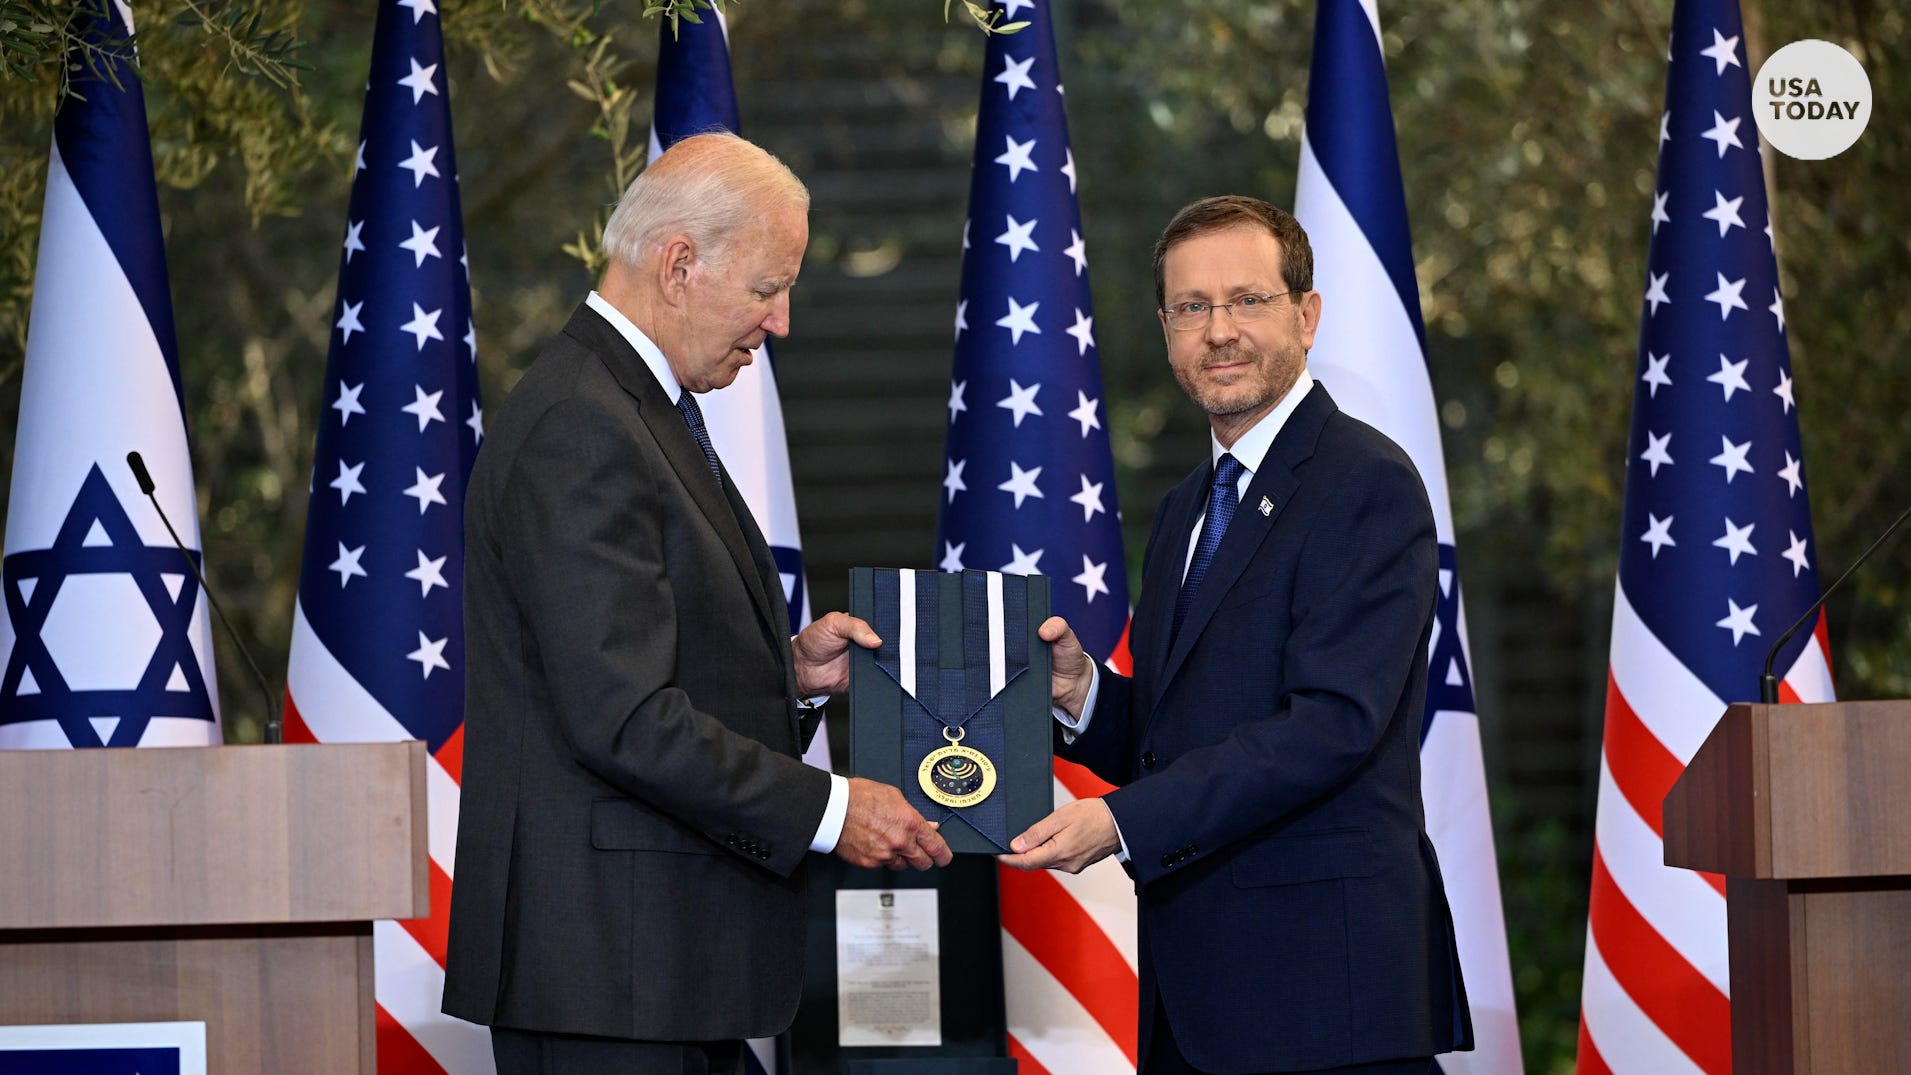 Biden Awarded Medal Of Honor For His Commitment To Israel